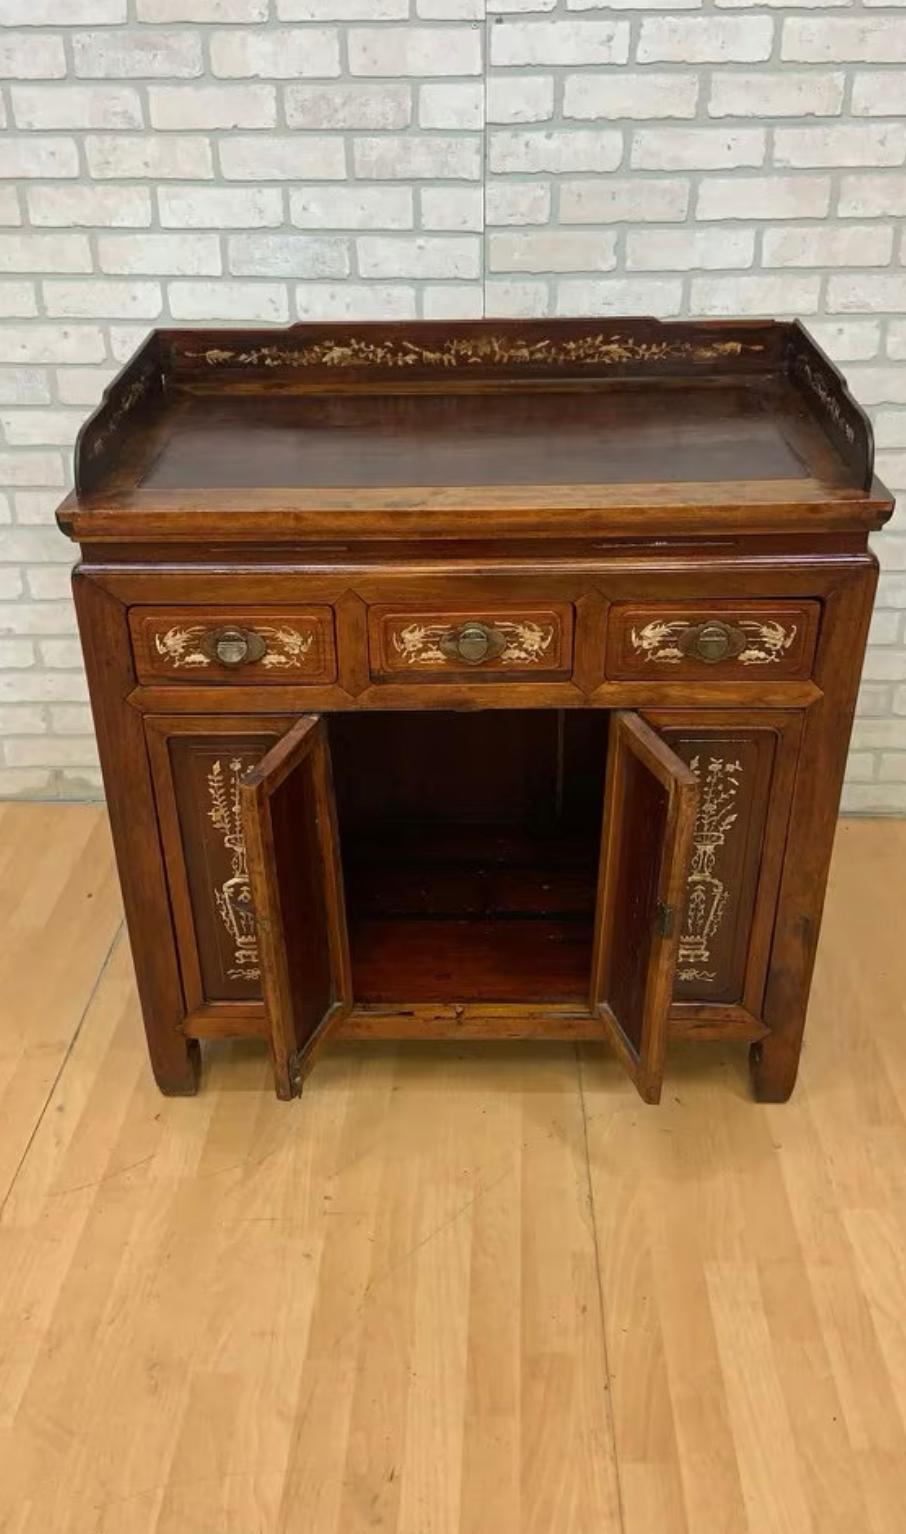 19th Century Antique Chinese Jiangsu Province Rosewood with Bone Inlay Sideboard Cabinet For Sale